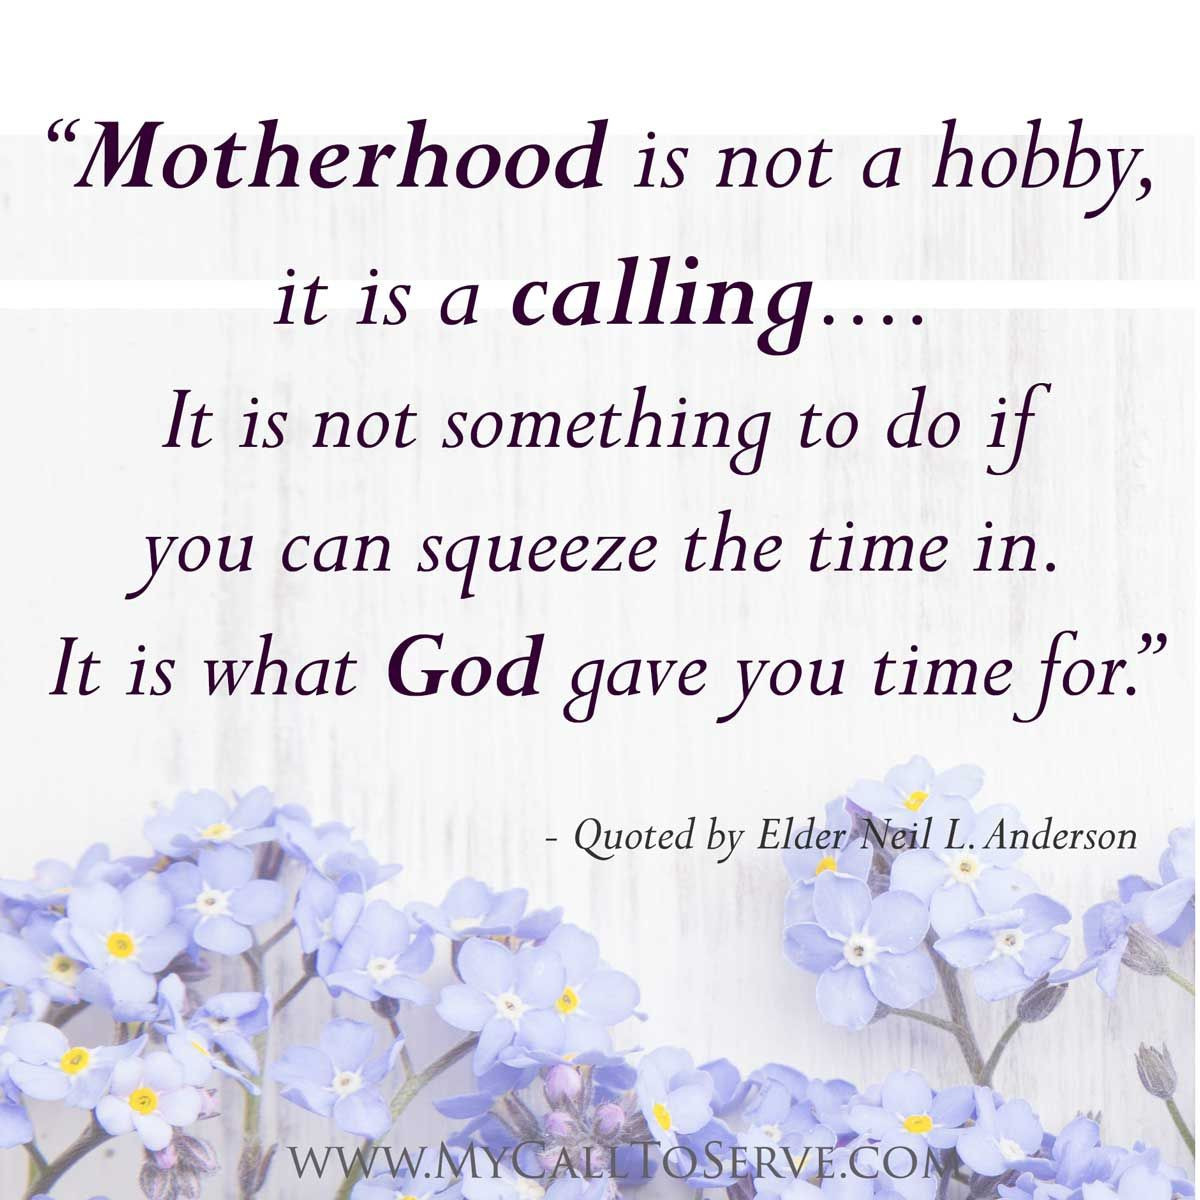 Lds Quotes About Motherhood
 Beautiful LDS Mother s Day Quotes